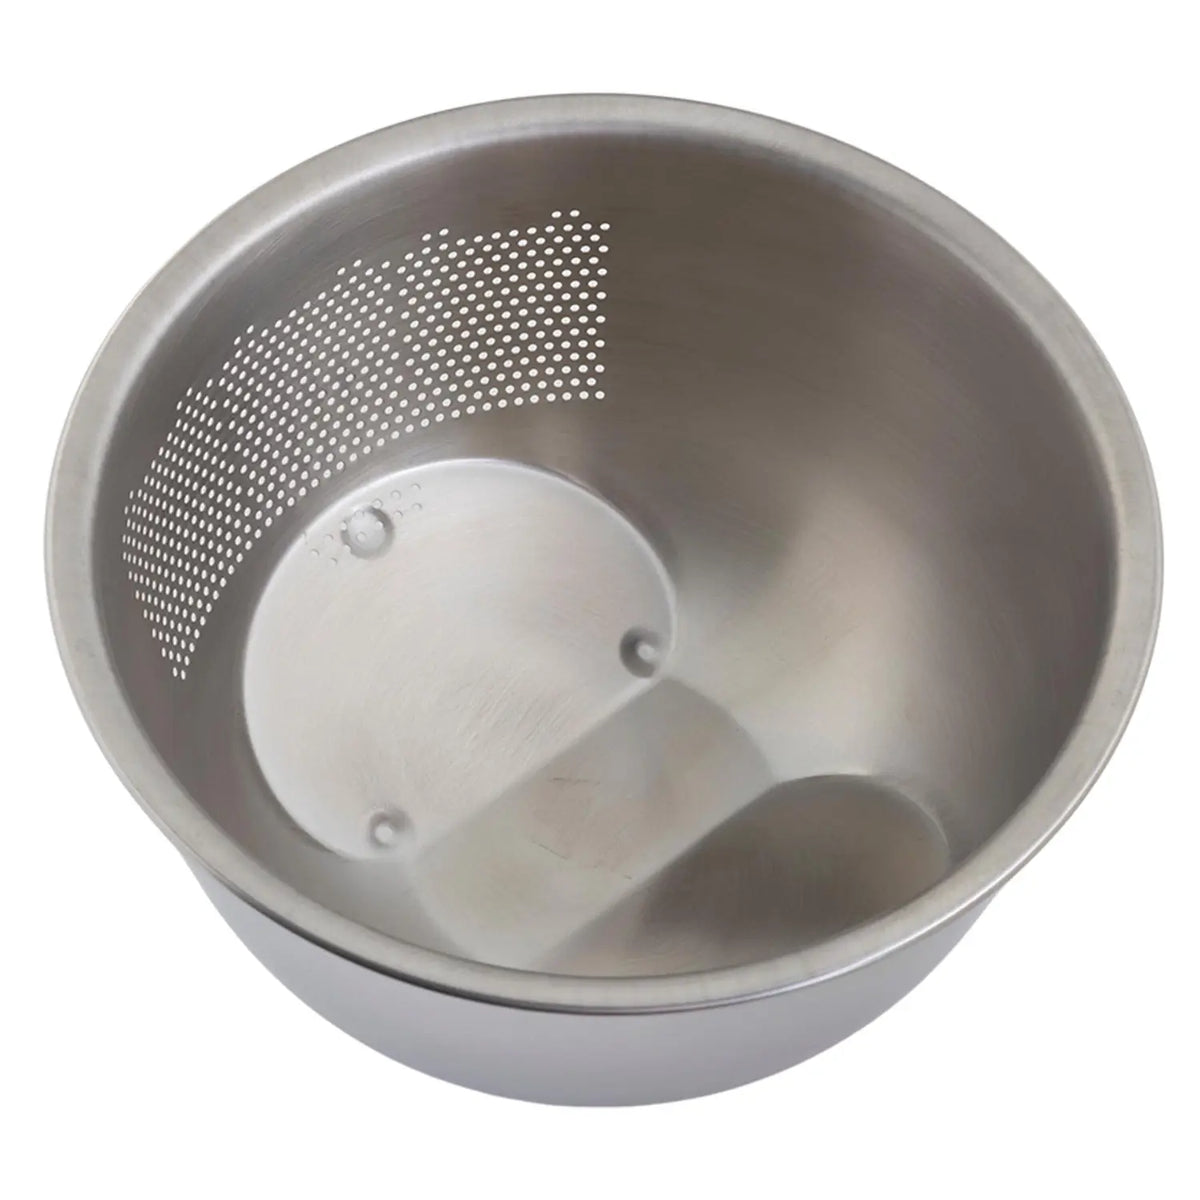 Fujii Stainless Steel 3-Way Rice Washing Bowl with Perforated Strainer 21.5cm